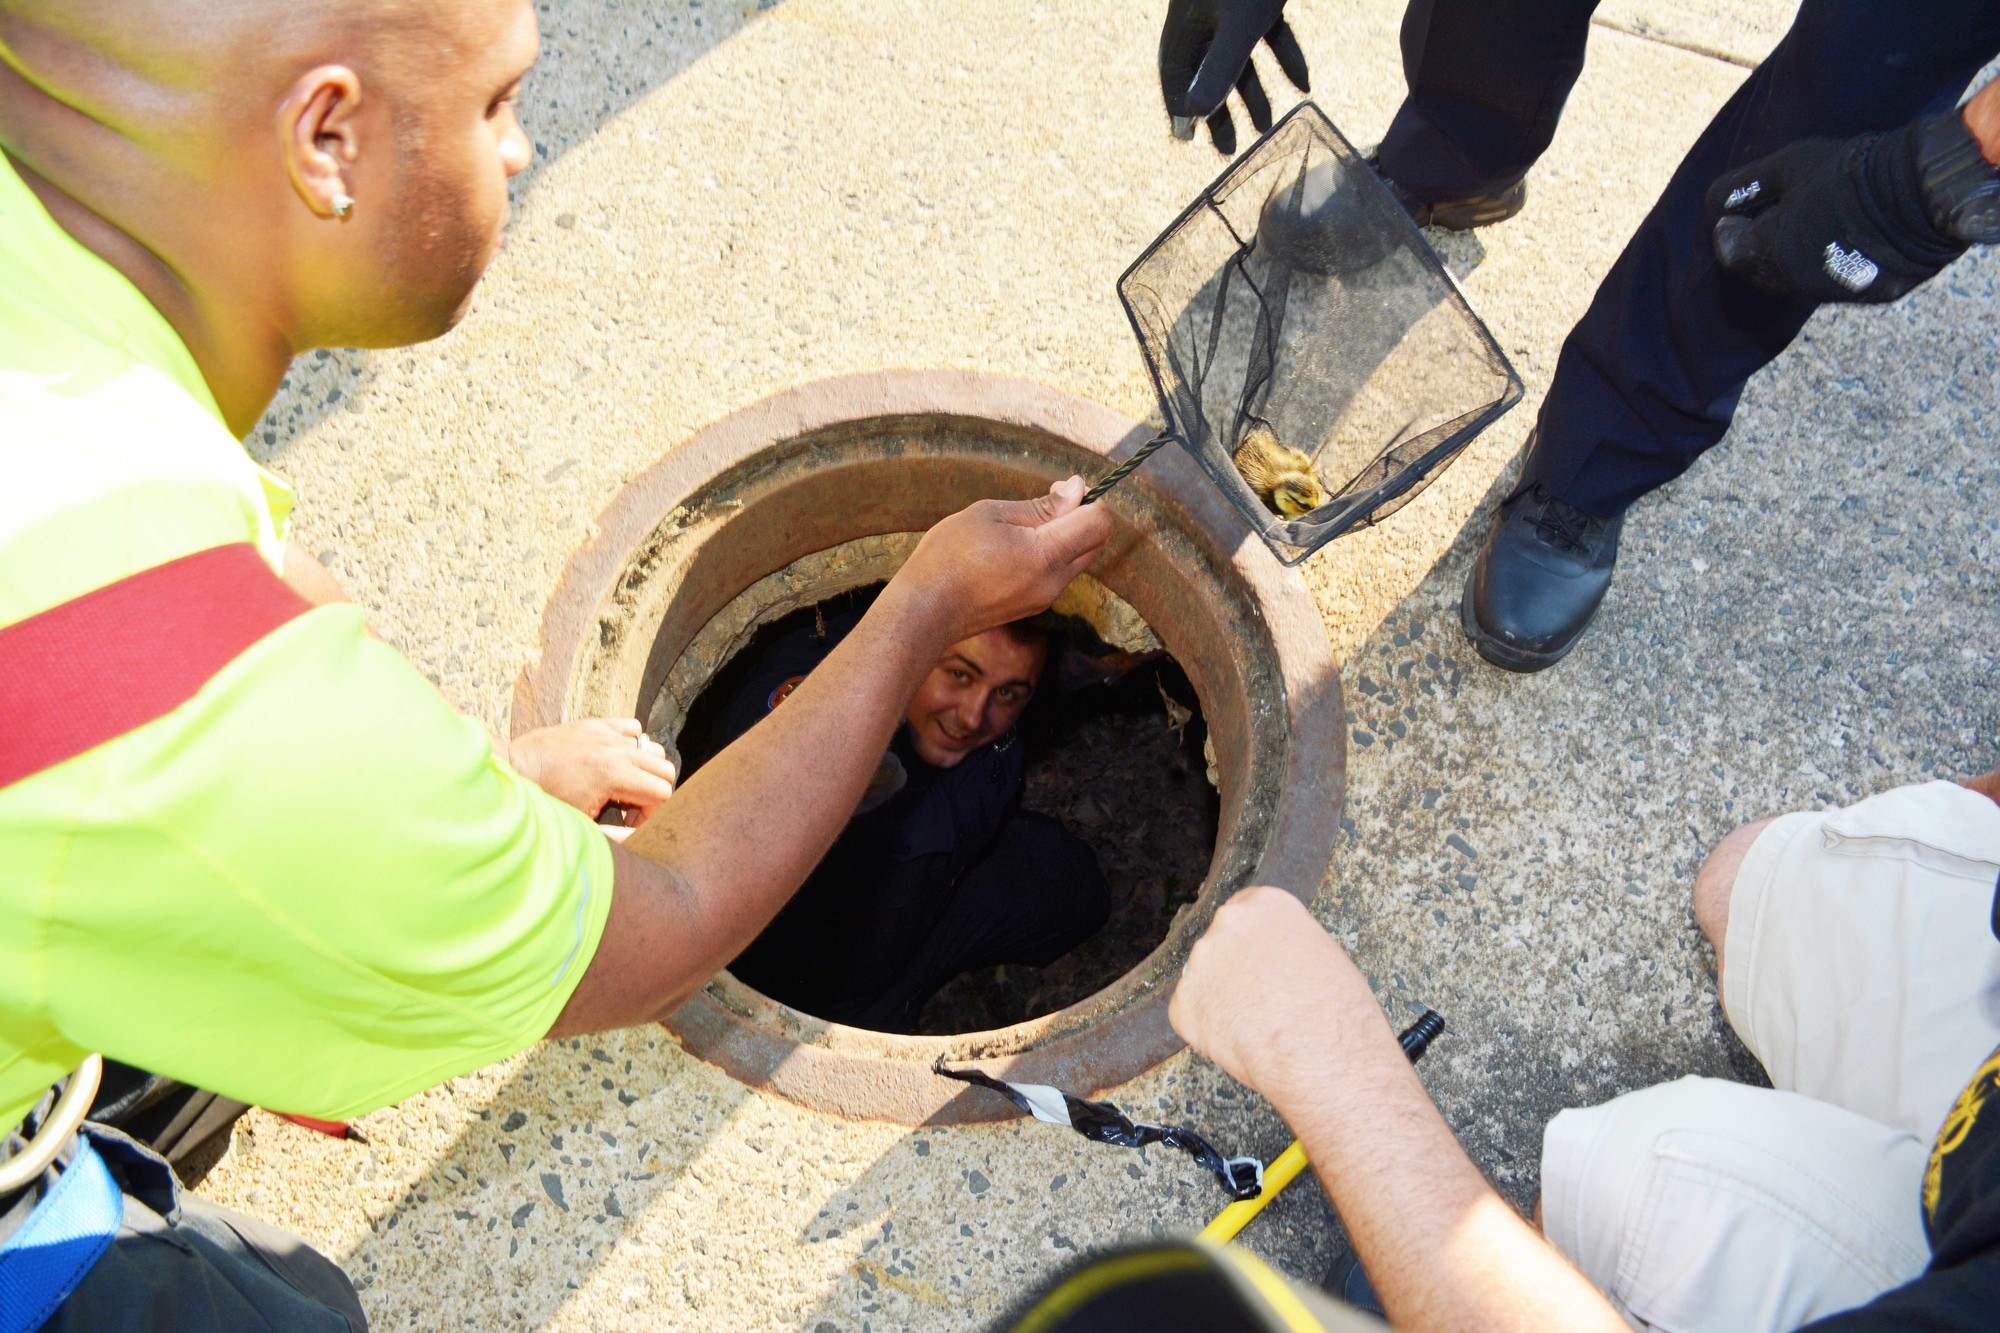 Members of the Nassau County Police Department and Baldwin Fire Department rescued seven baby ducks that were stuck down a sewer drain on the corner of Bedell Street and Loft Avenue on July 10. 